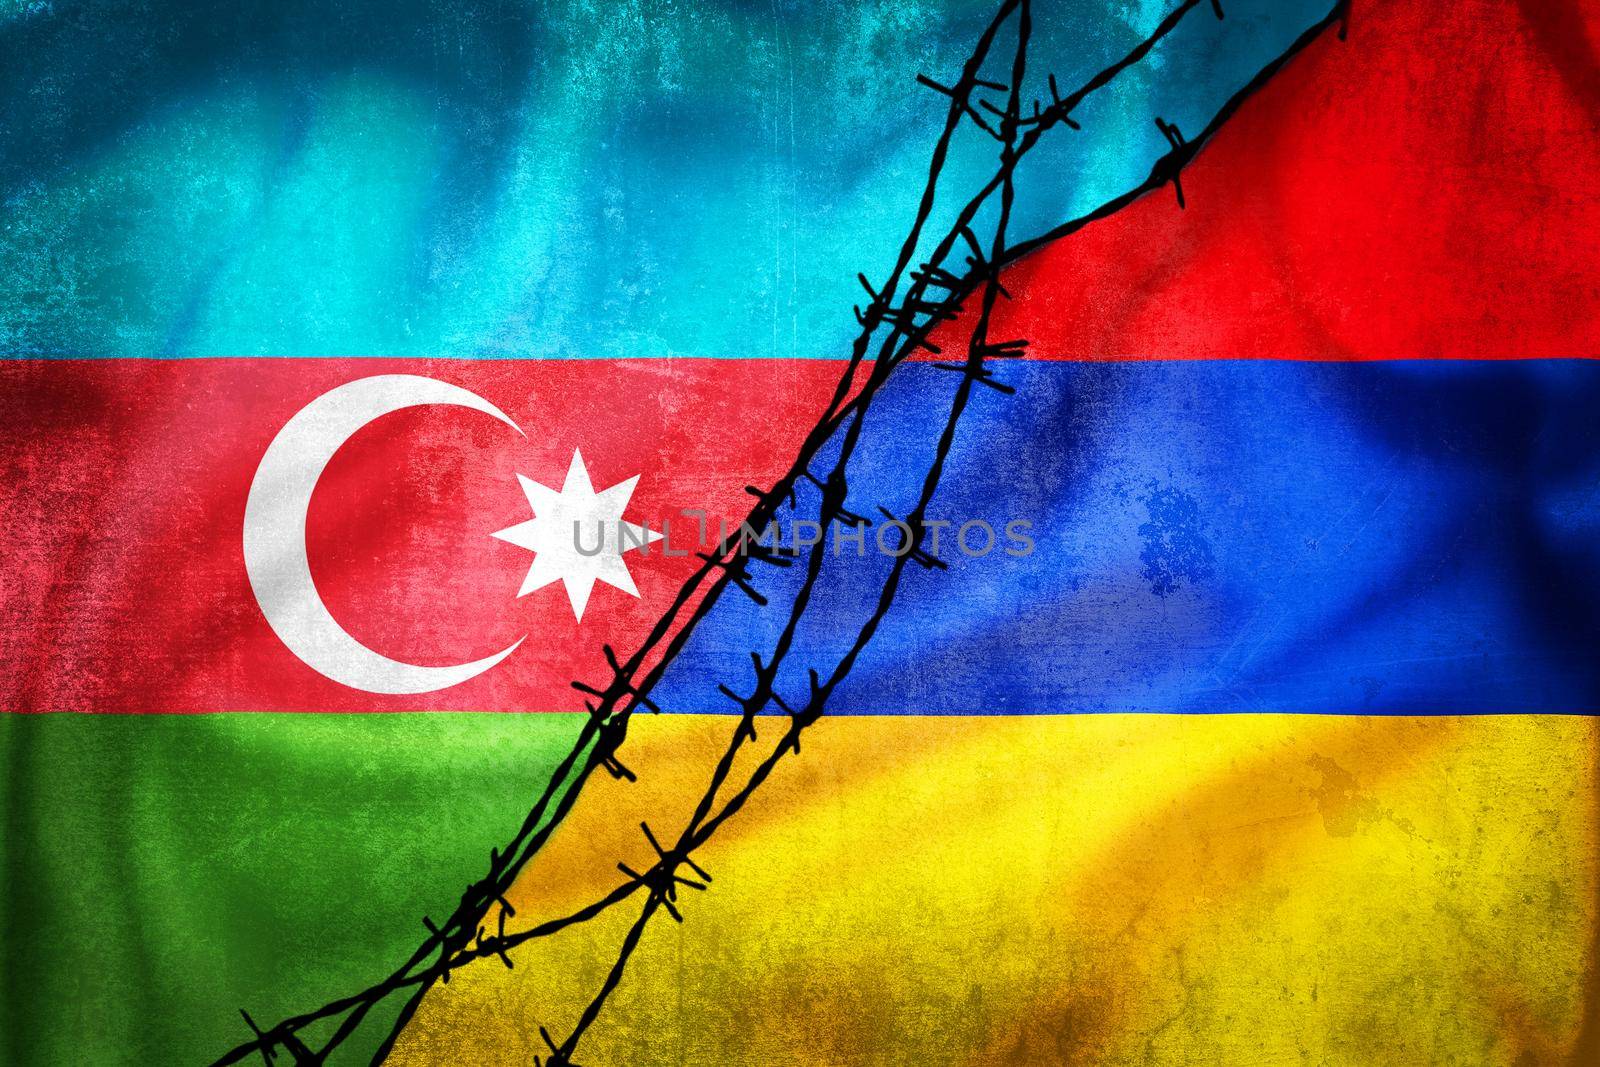 Grunge flags of Azerbaijan and Armenia divided by barb wire illustration, concept of tense relations between two countries